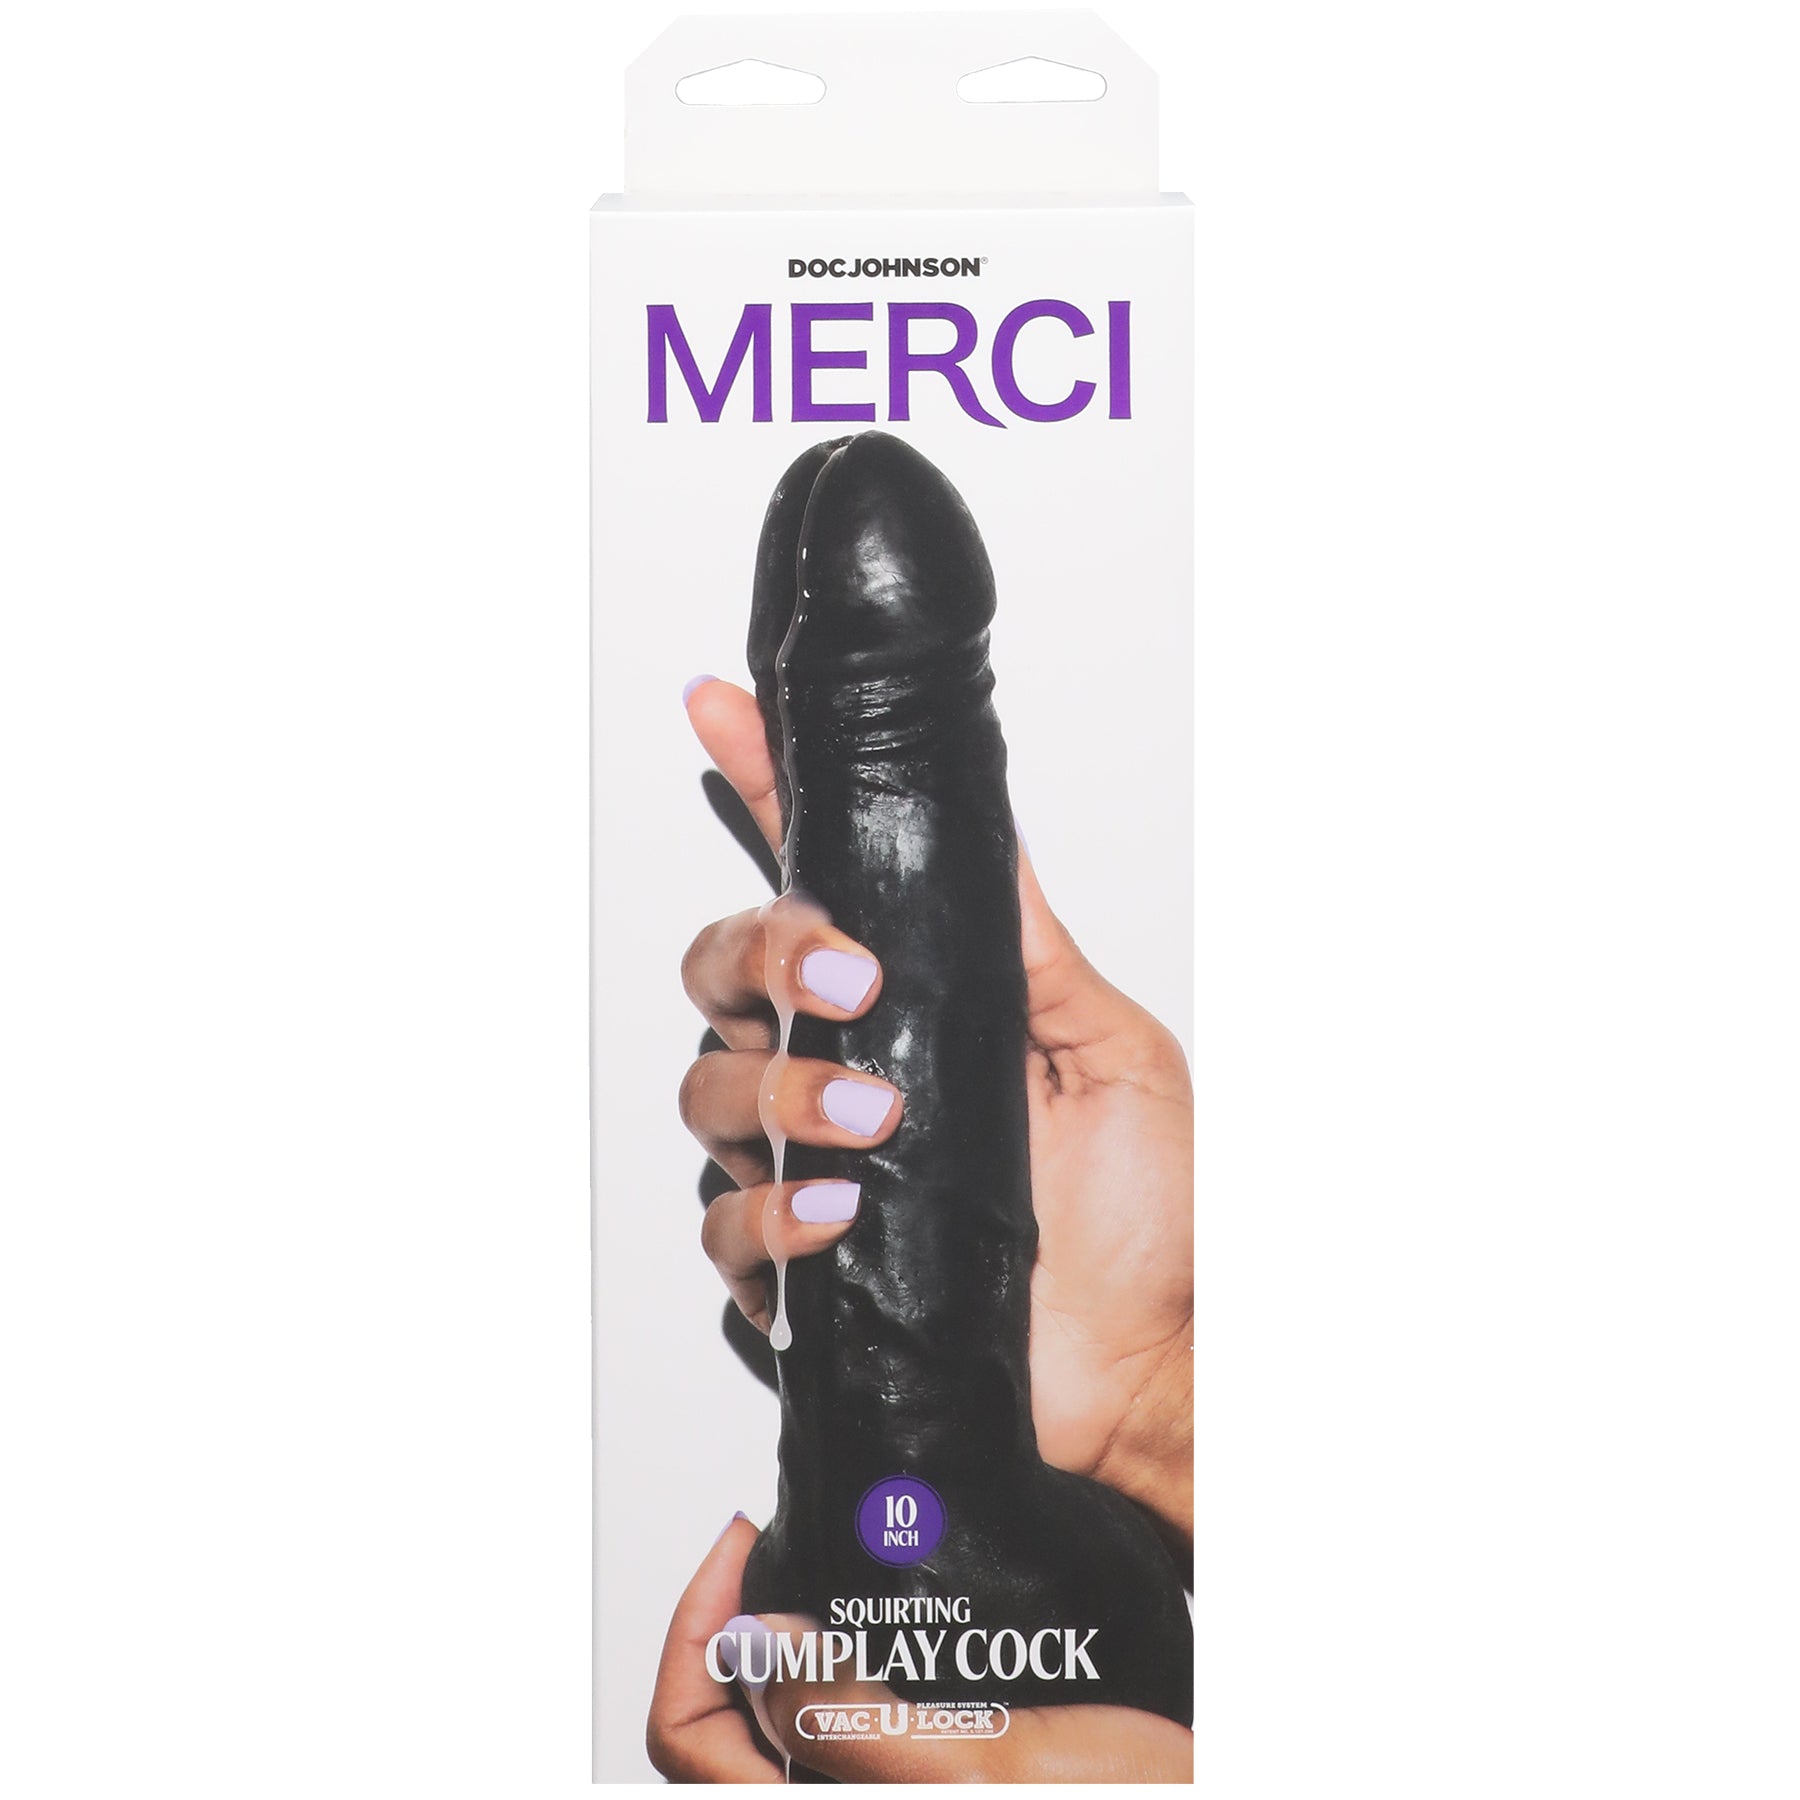 Merci - 10 Inch Dual Density Squirting Cumplay  Cock With Removable Vac-U-Lock Suction Cup -  Black-2